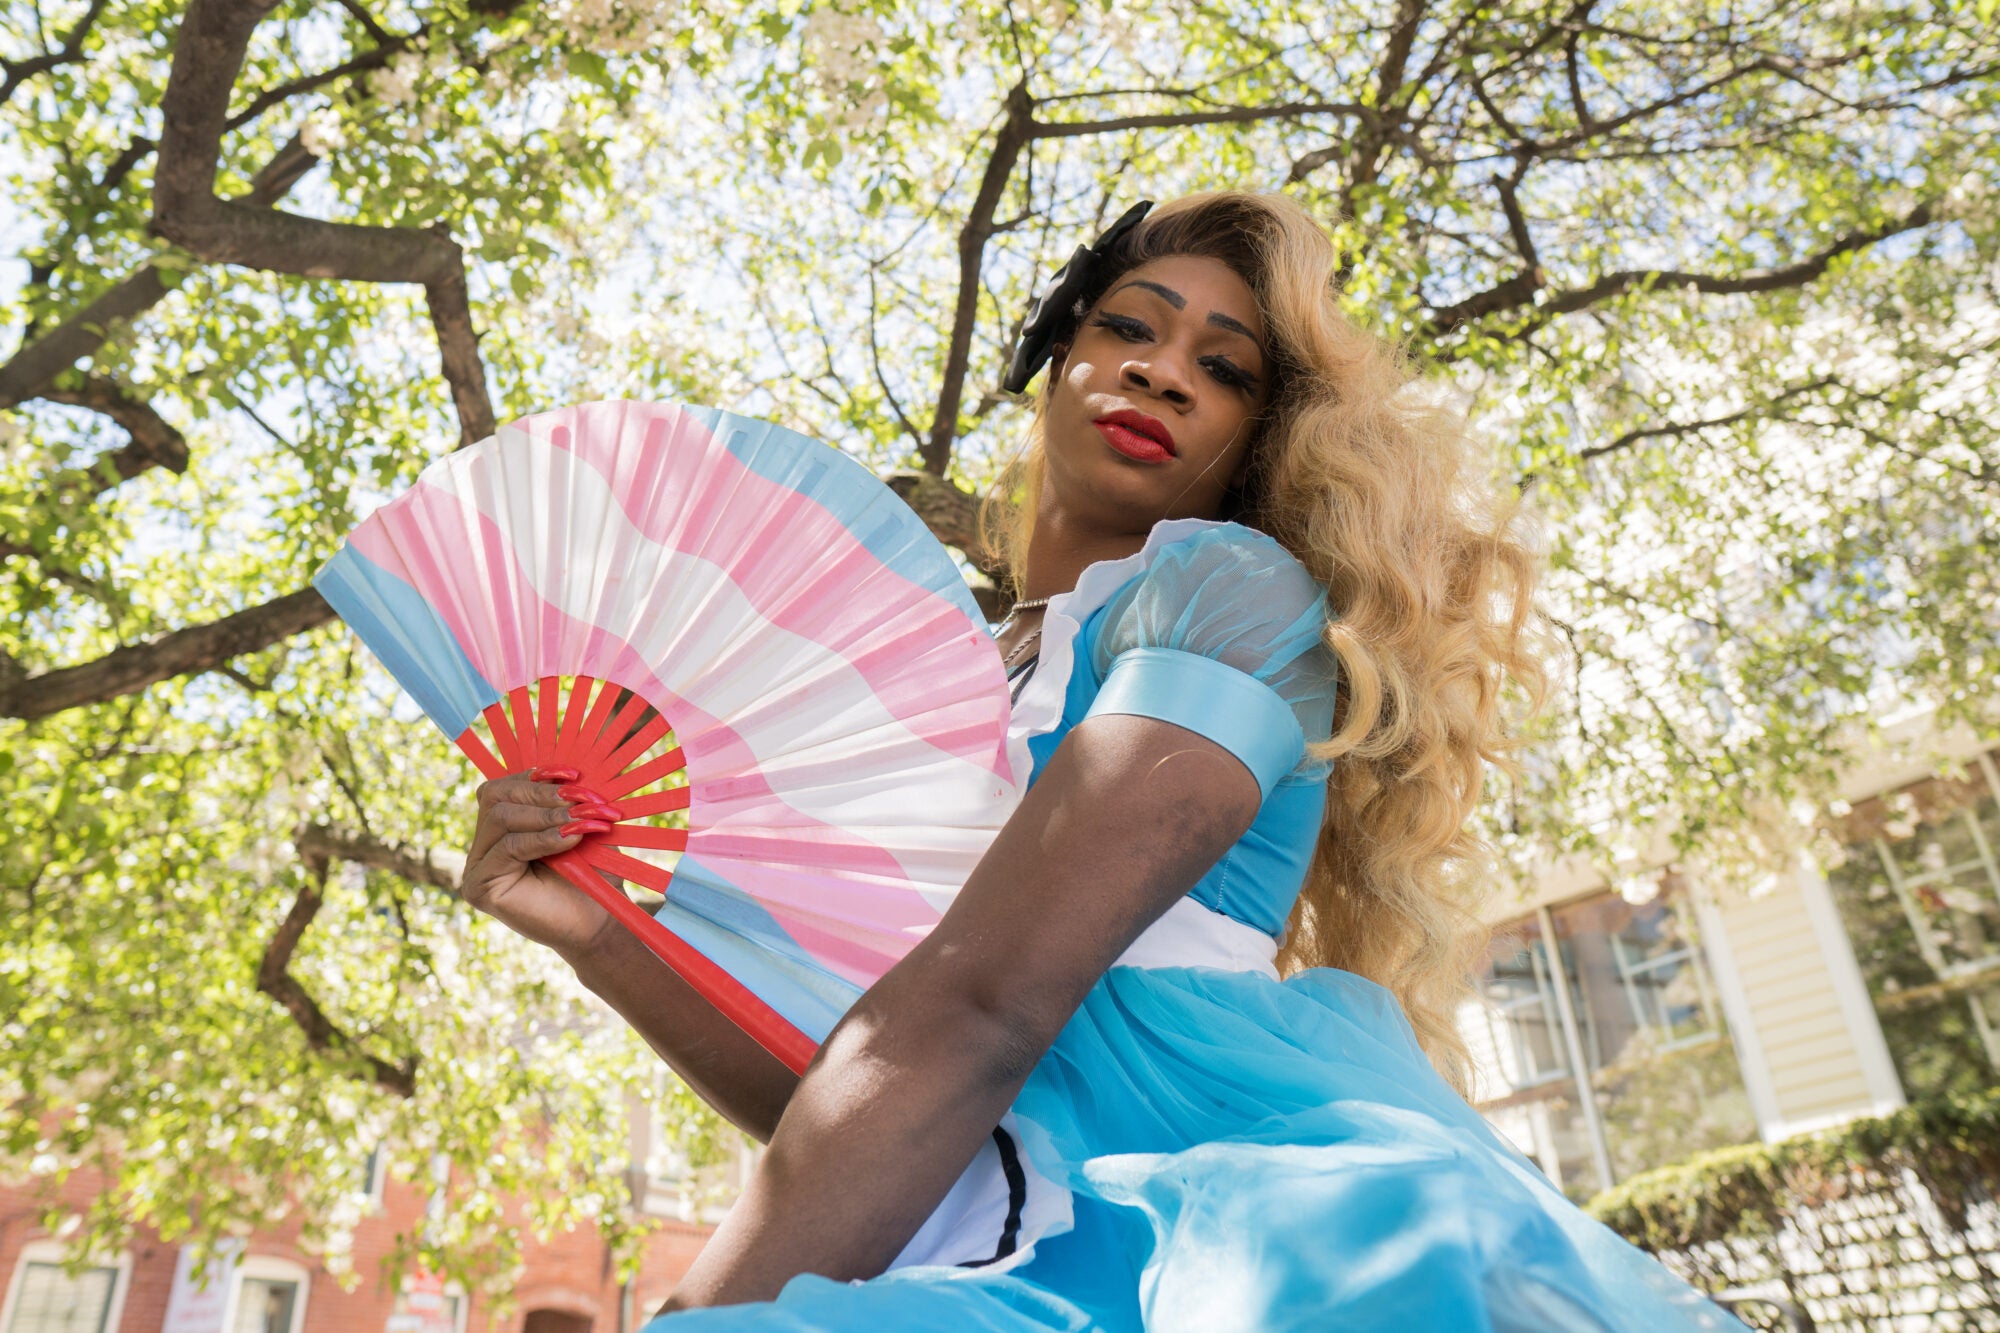 A performer dressed in an "Alice in Wonderland" costume poses with a fan